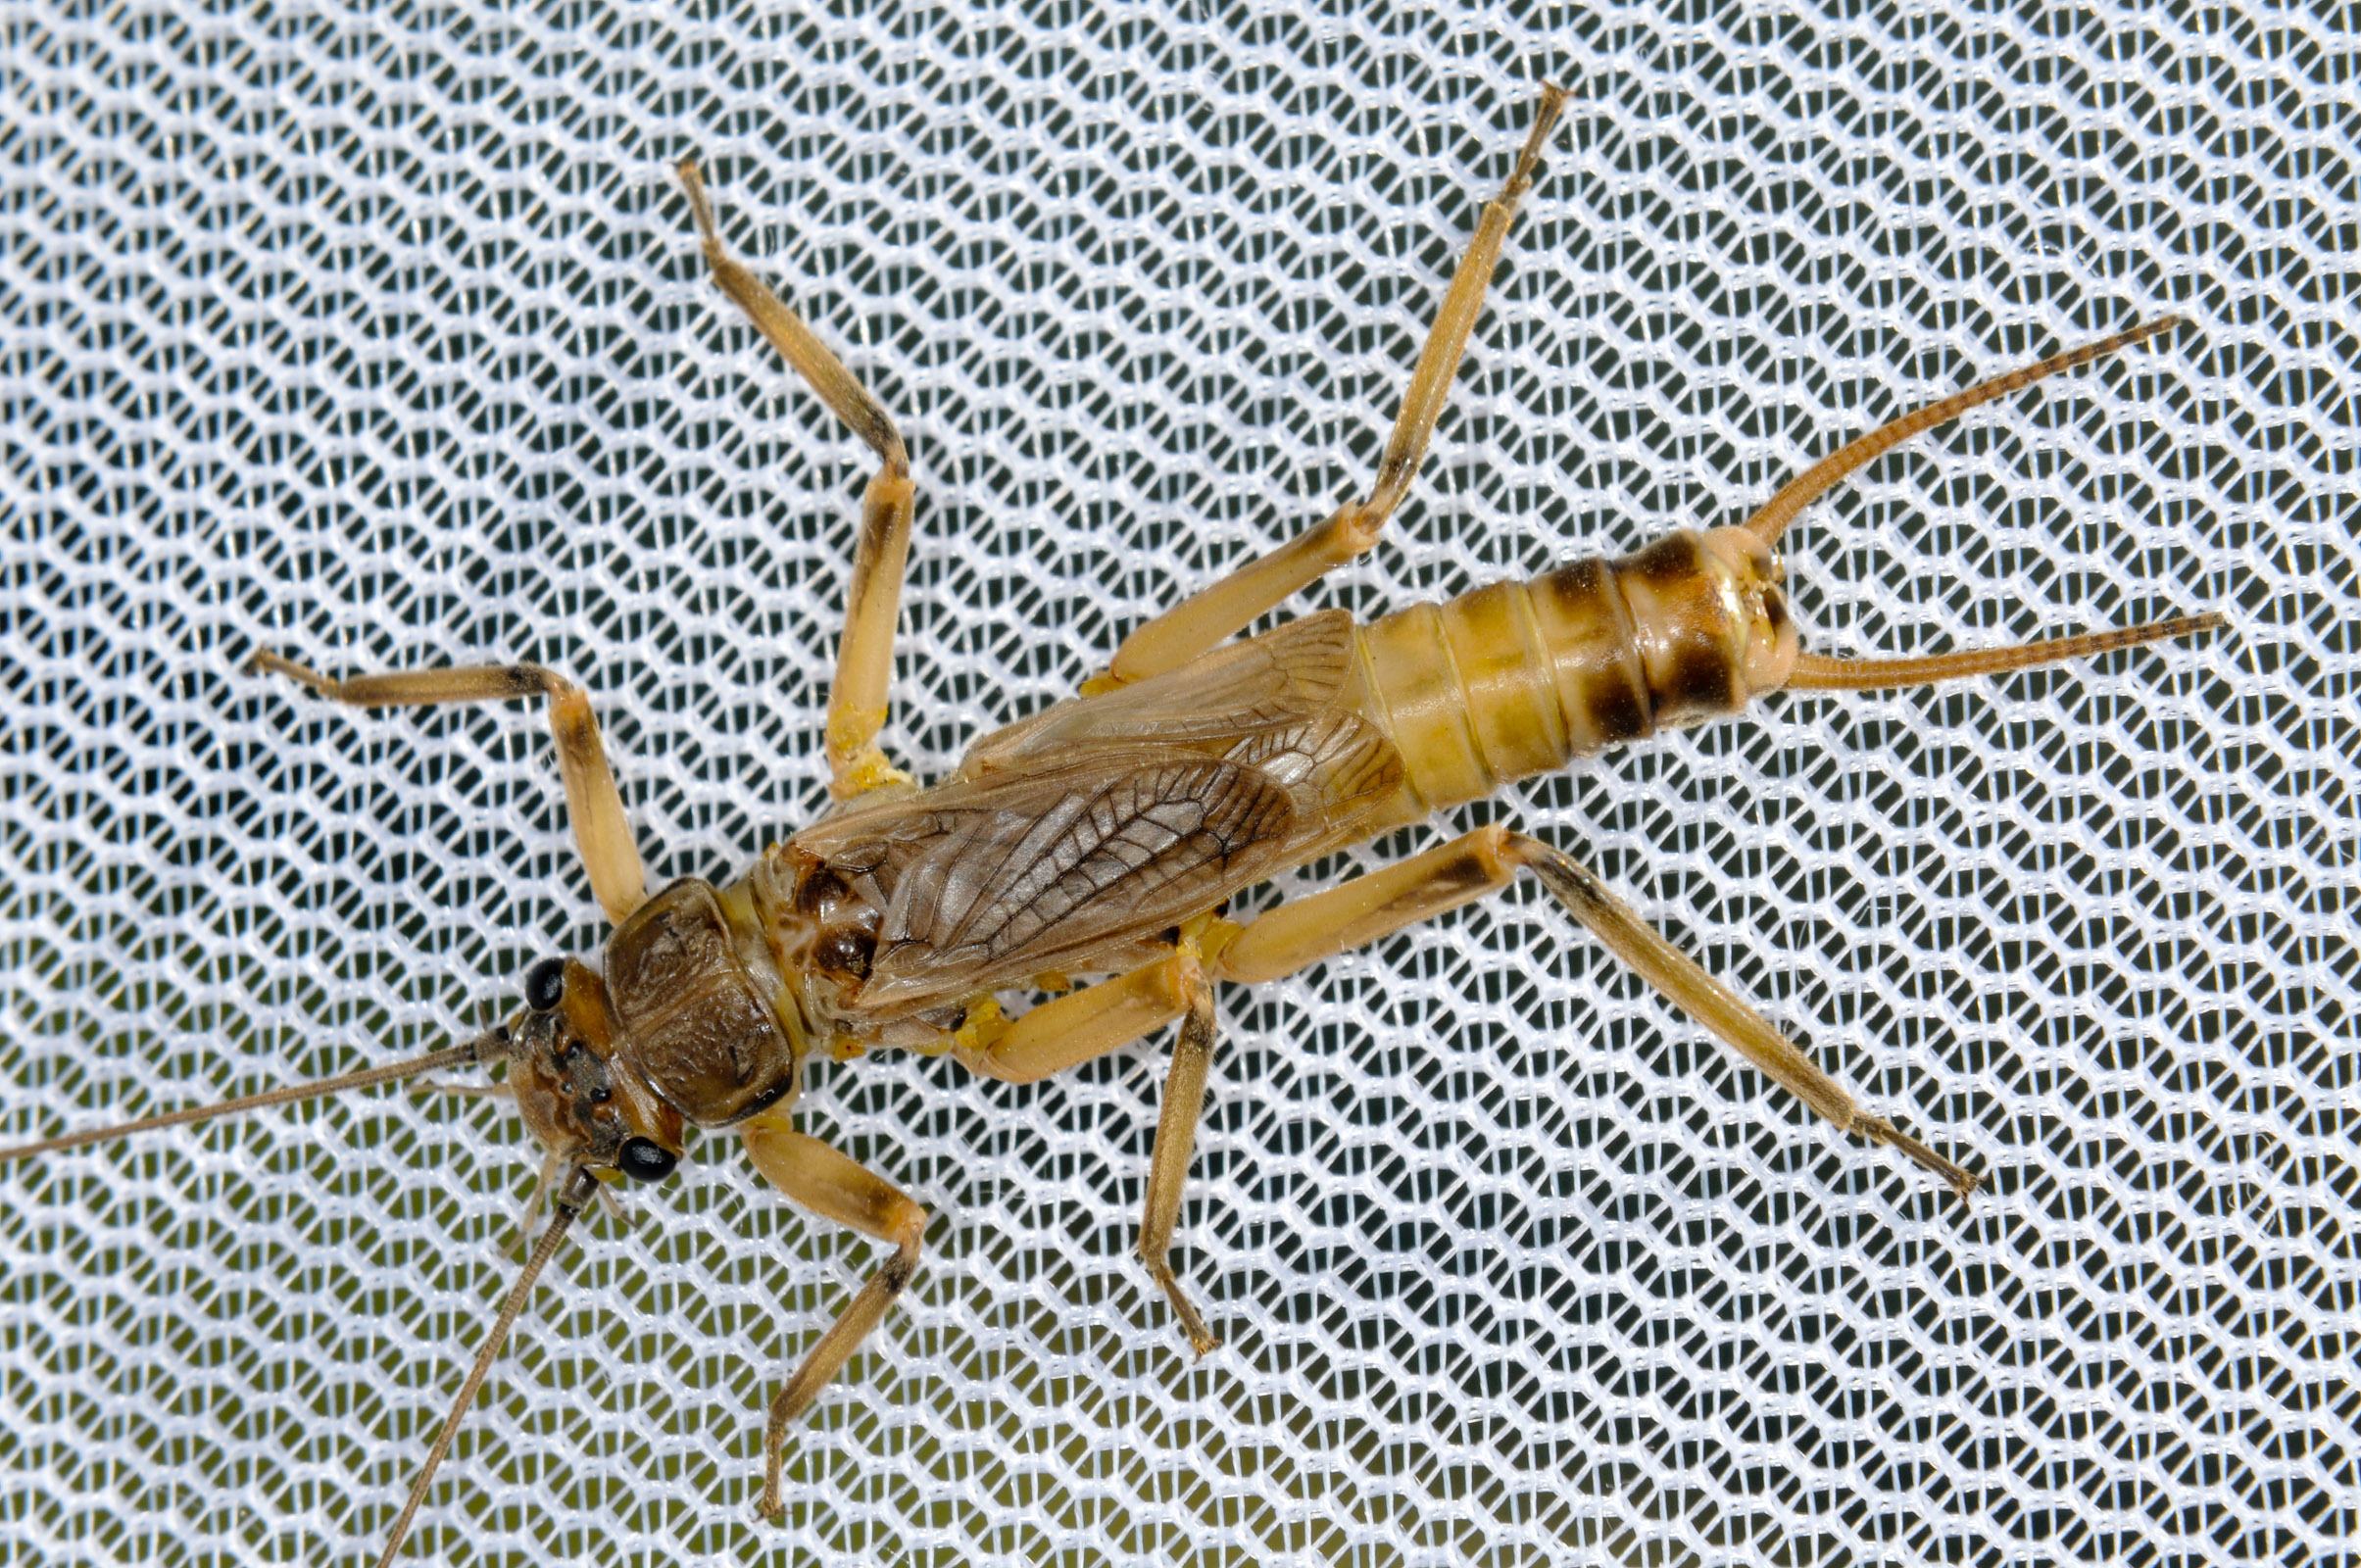 Male Claassenia sabulosa (Golden Stone) Stonefly Adult from the Touchet River in Washington